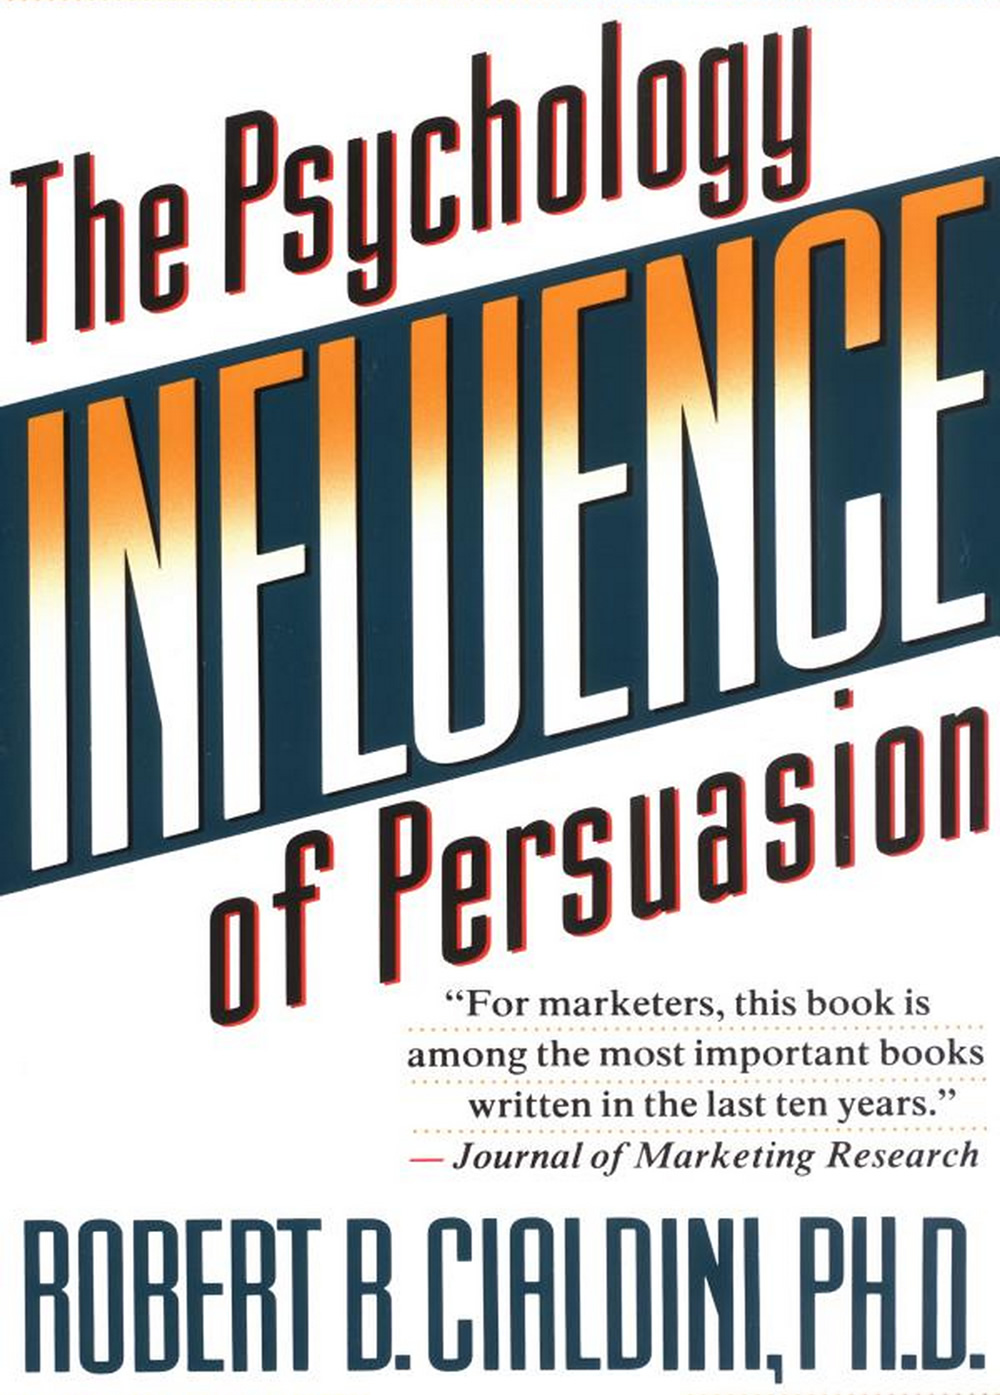 Robert Cialdini “Influence: The Psychology of Persuasion”